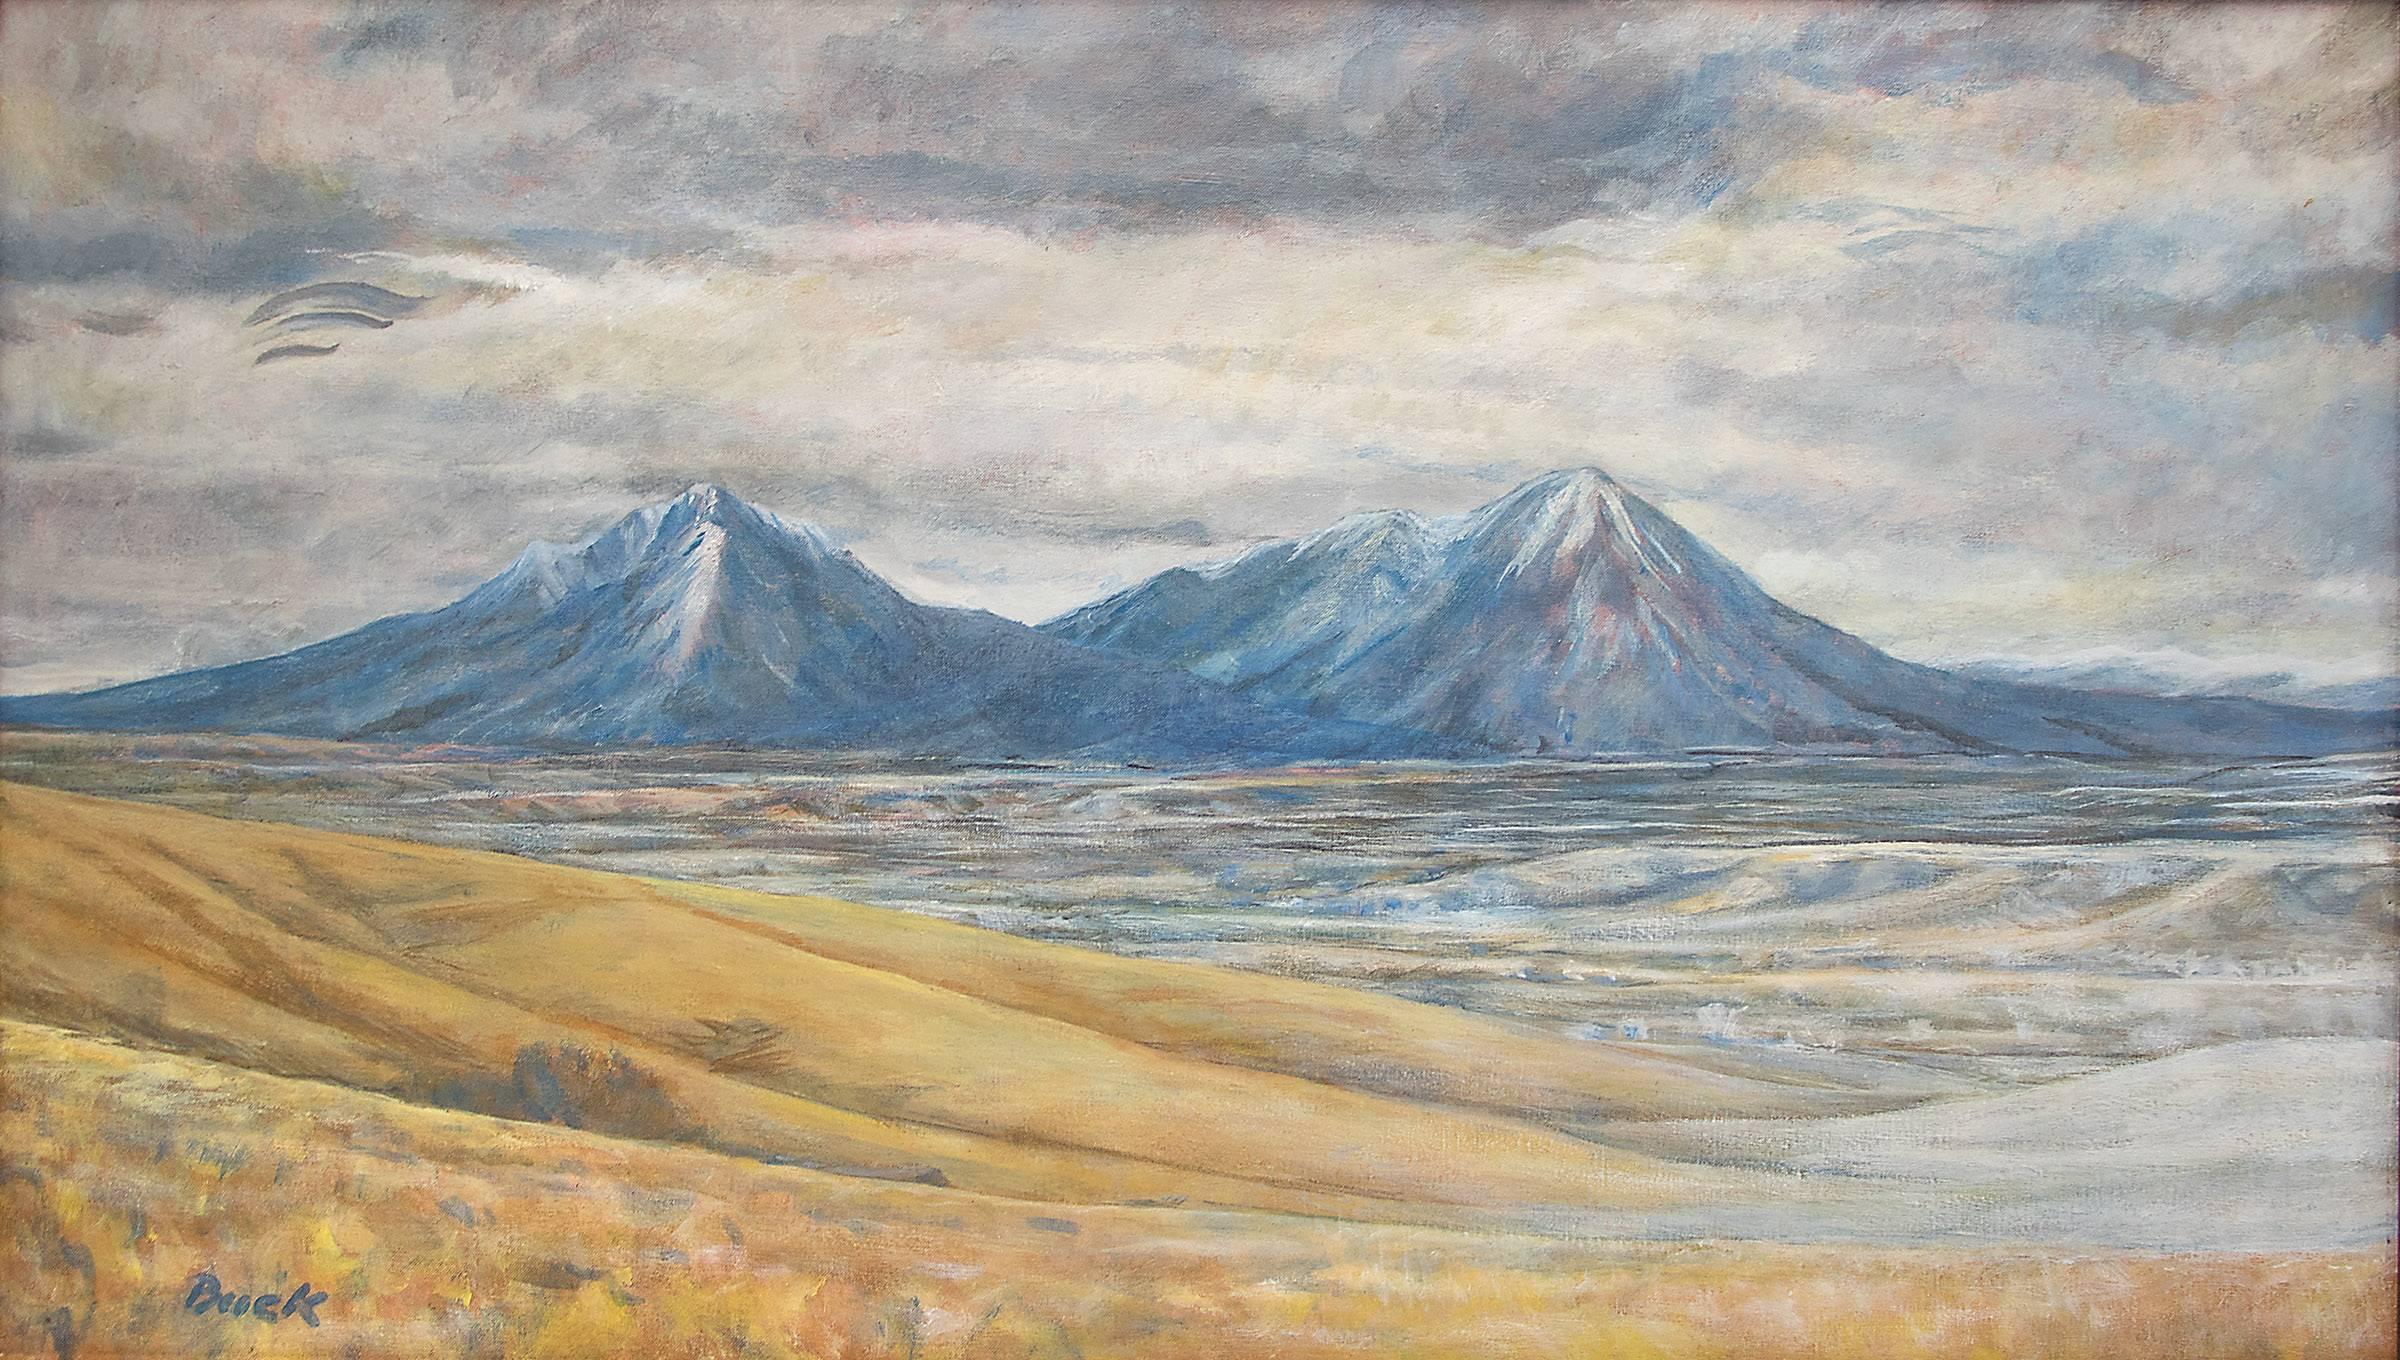 Spanish Peaks (Southern Colorado Landscape) - Painting by Unknown